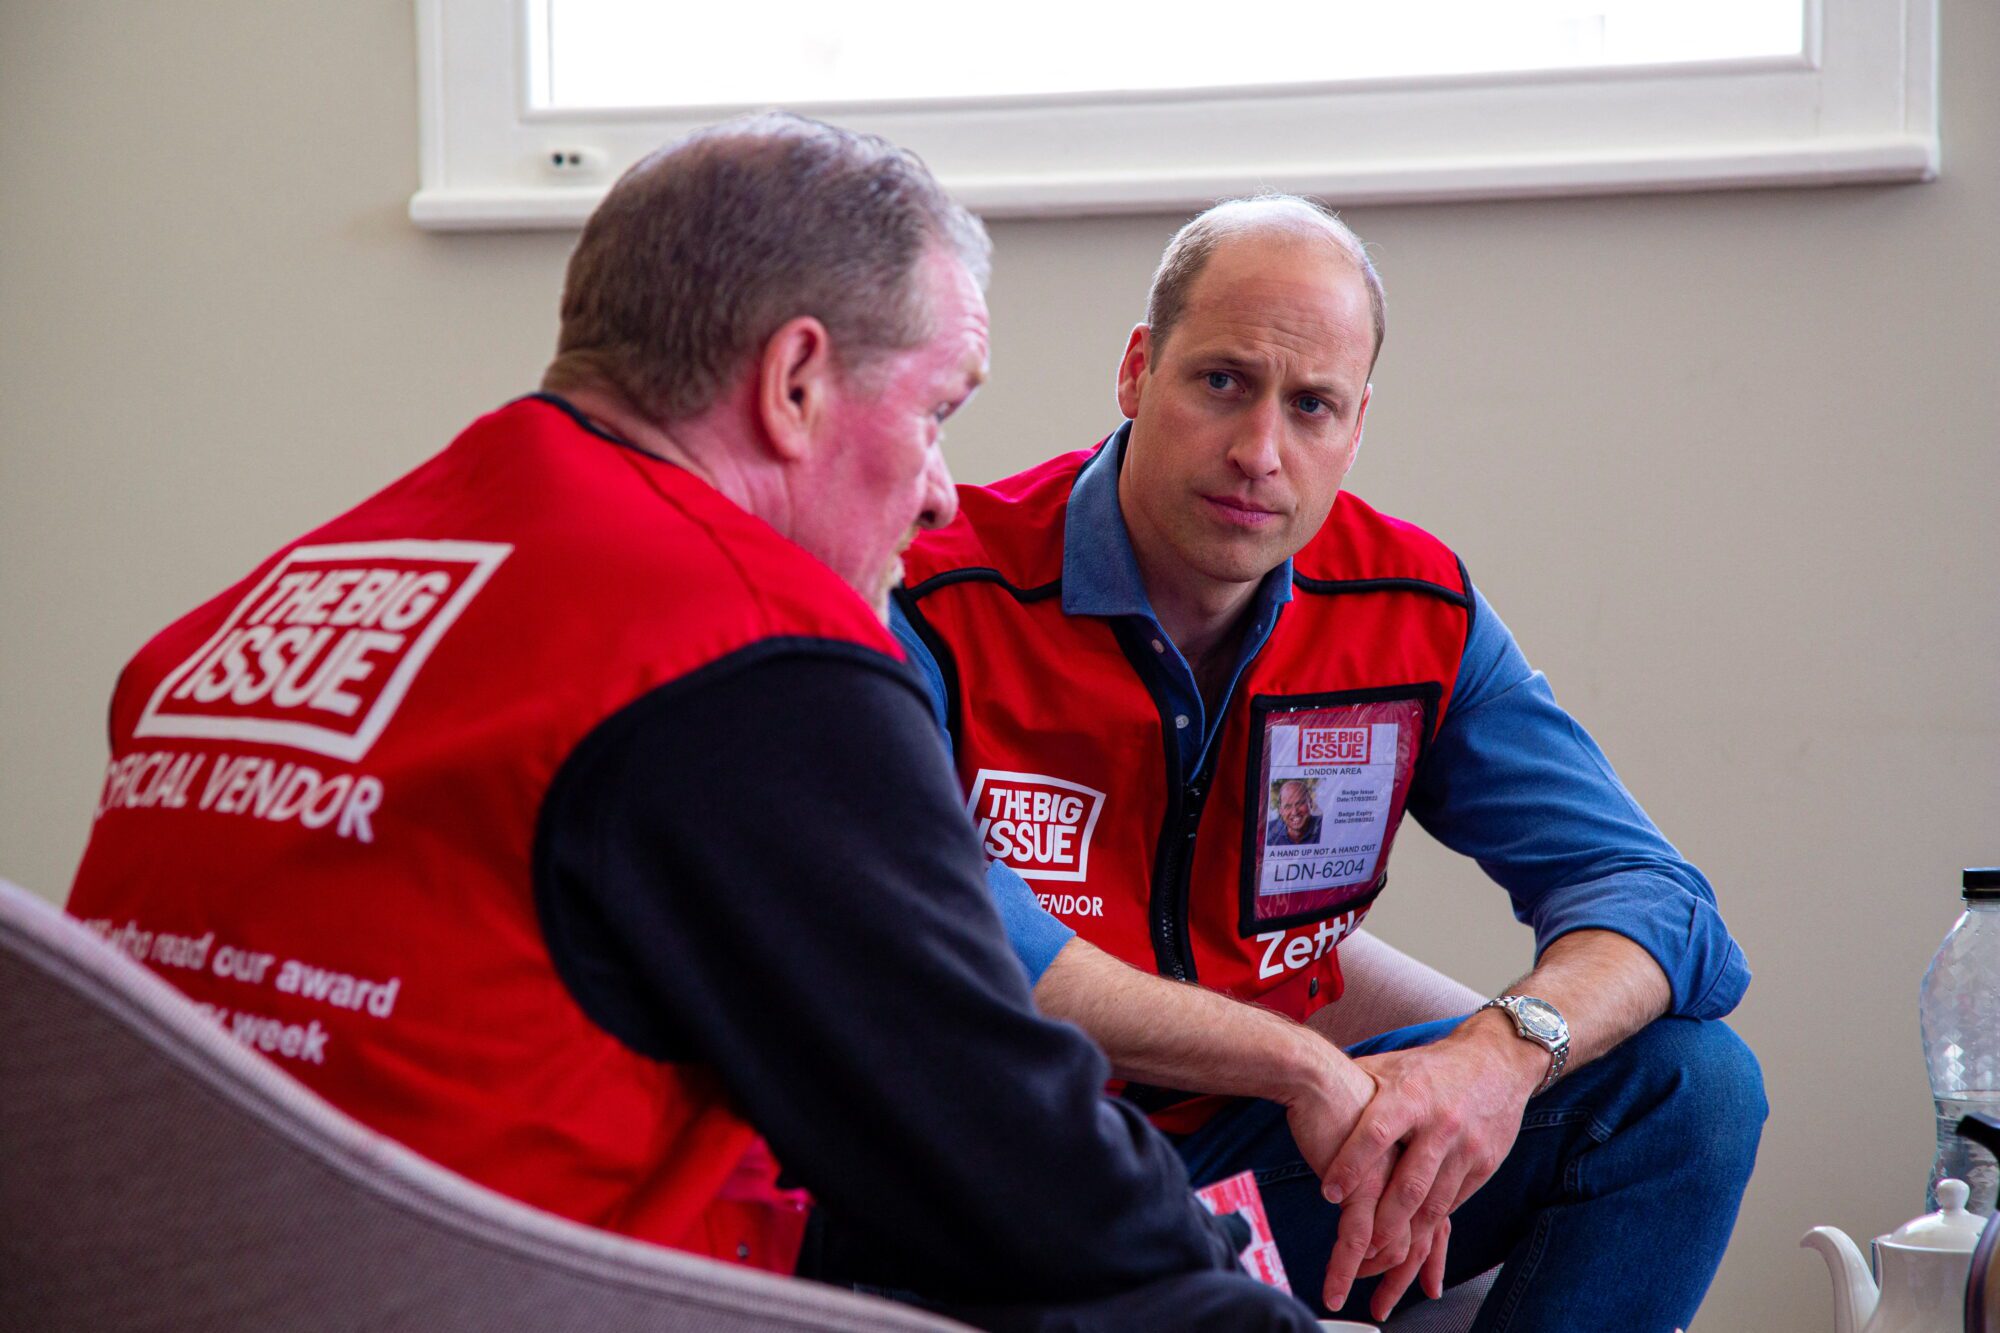 Britain's Prince William meets a vendor of The Big Issue newspaper in this undated handout picture.  Courtesy of Andy Parsons/The Big Issue/Handout via REUTERS  ATTENTION EDITORS - THIS IMAGE HAS BEEN SUPPLIED BY A THIRD PARTY. NO RESALES. NO ARCHIVES. NO ENHANCING, MANIPULATING OR MODIFYING IMAGE. MANDATORY CREDIT.